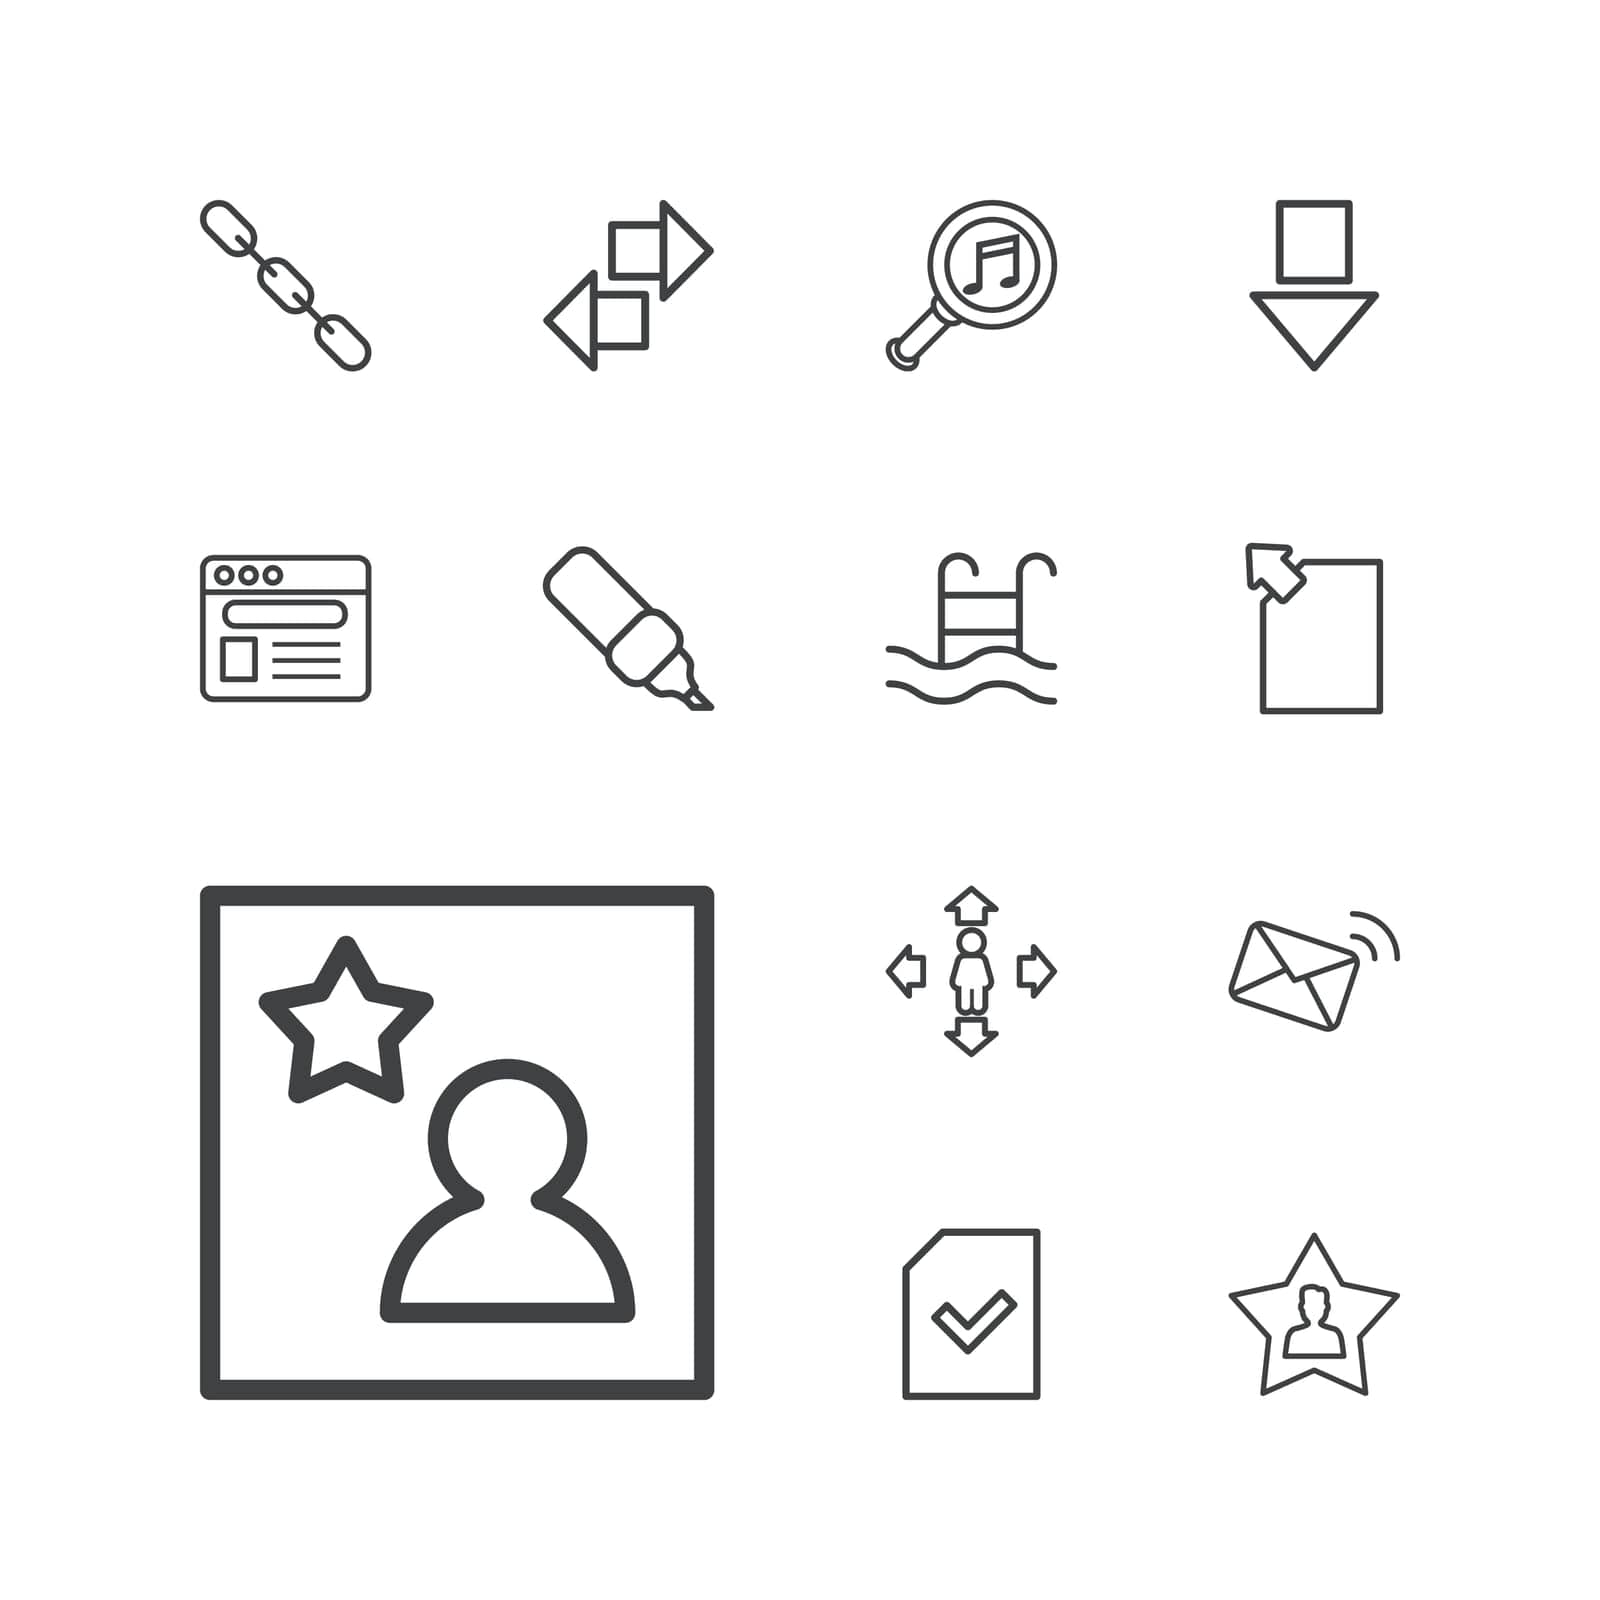 symbol,data,mail,arrow,concept,document,icon,sign,isolated,interface,down,button,swimming,download,music,file,white,web,flat,design,browser,pen,vector,man,communication,graphic,element,chain,move,set,business,serach,black,pool,photo,favourite,background,illustration,favorite,user,internet